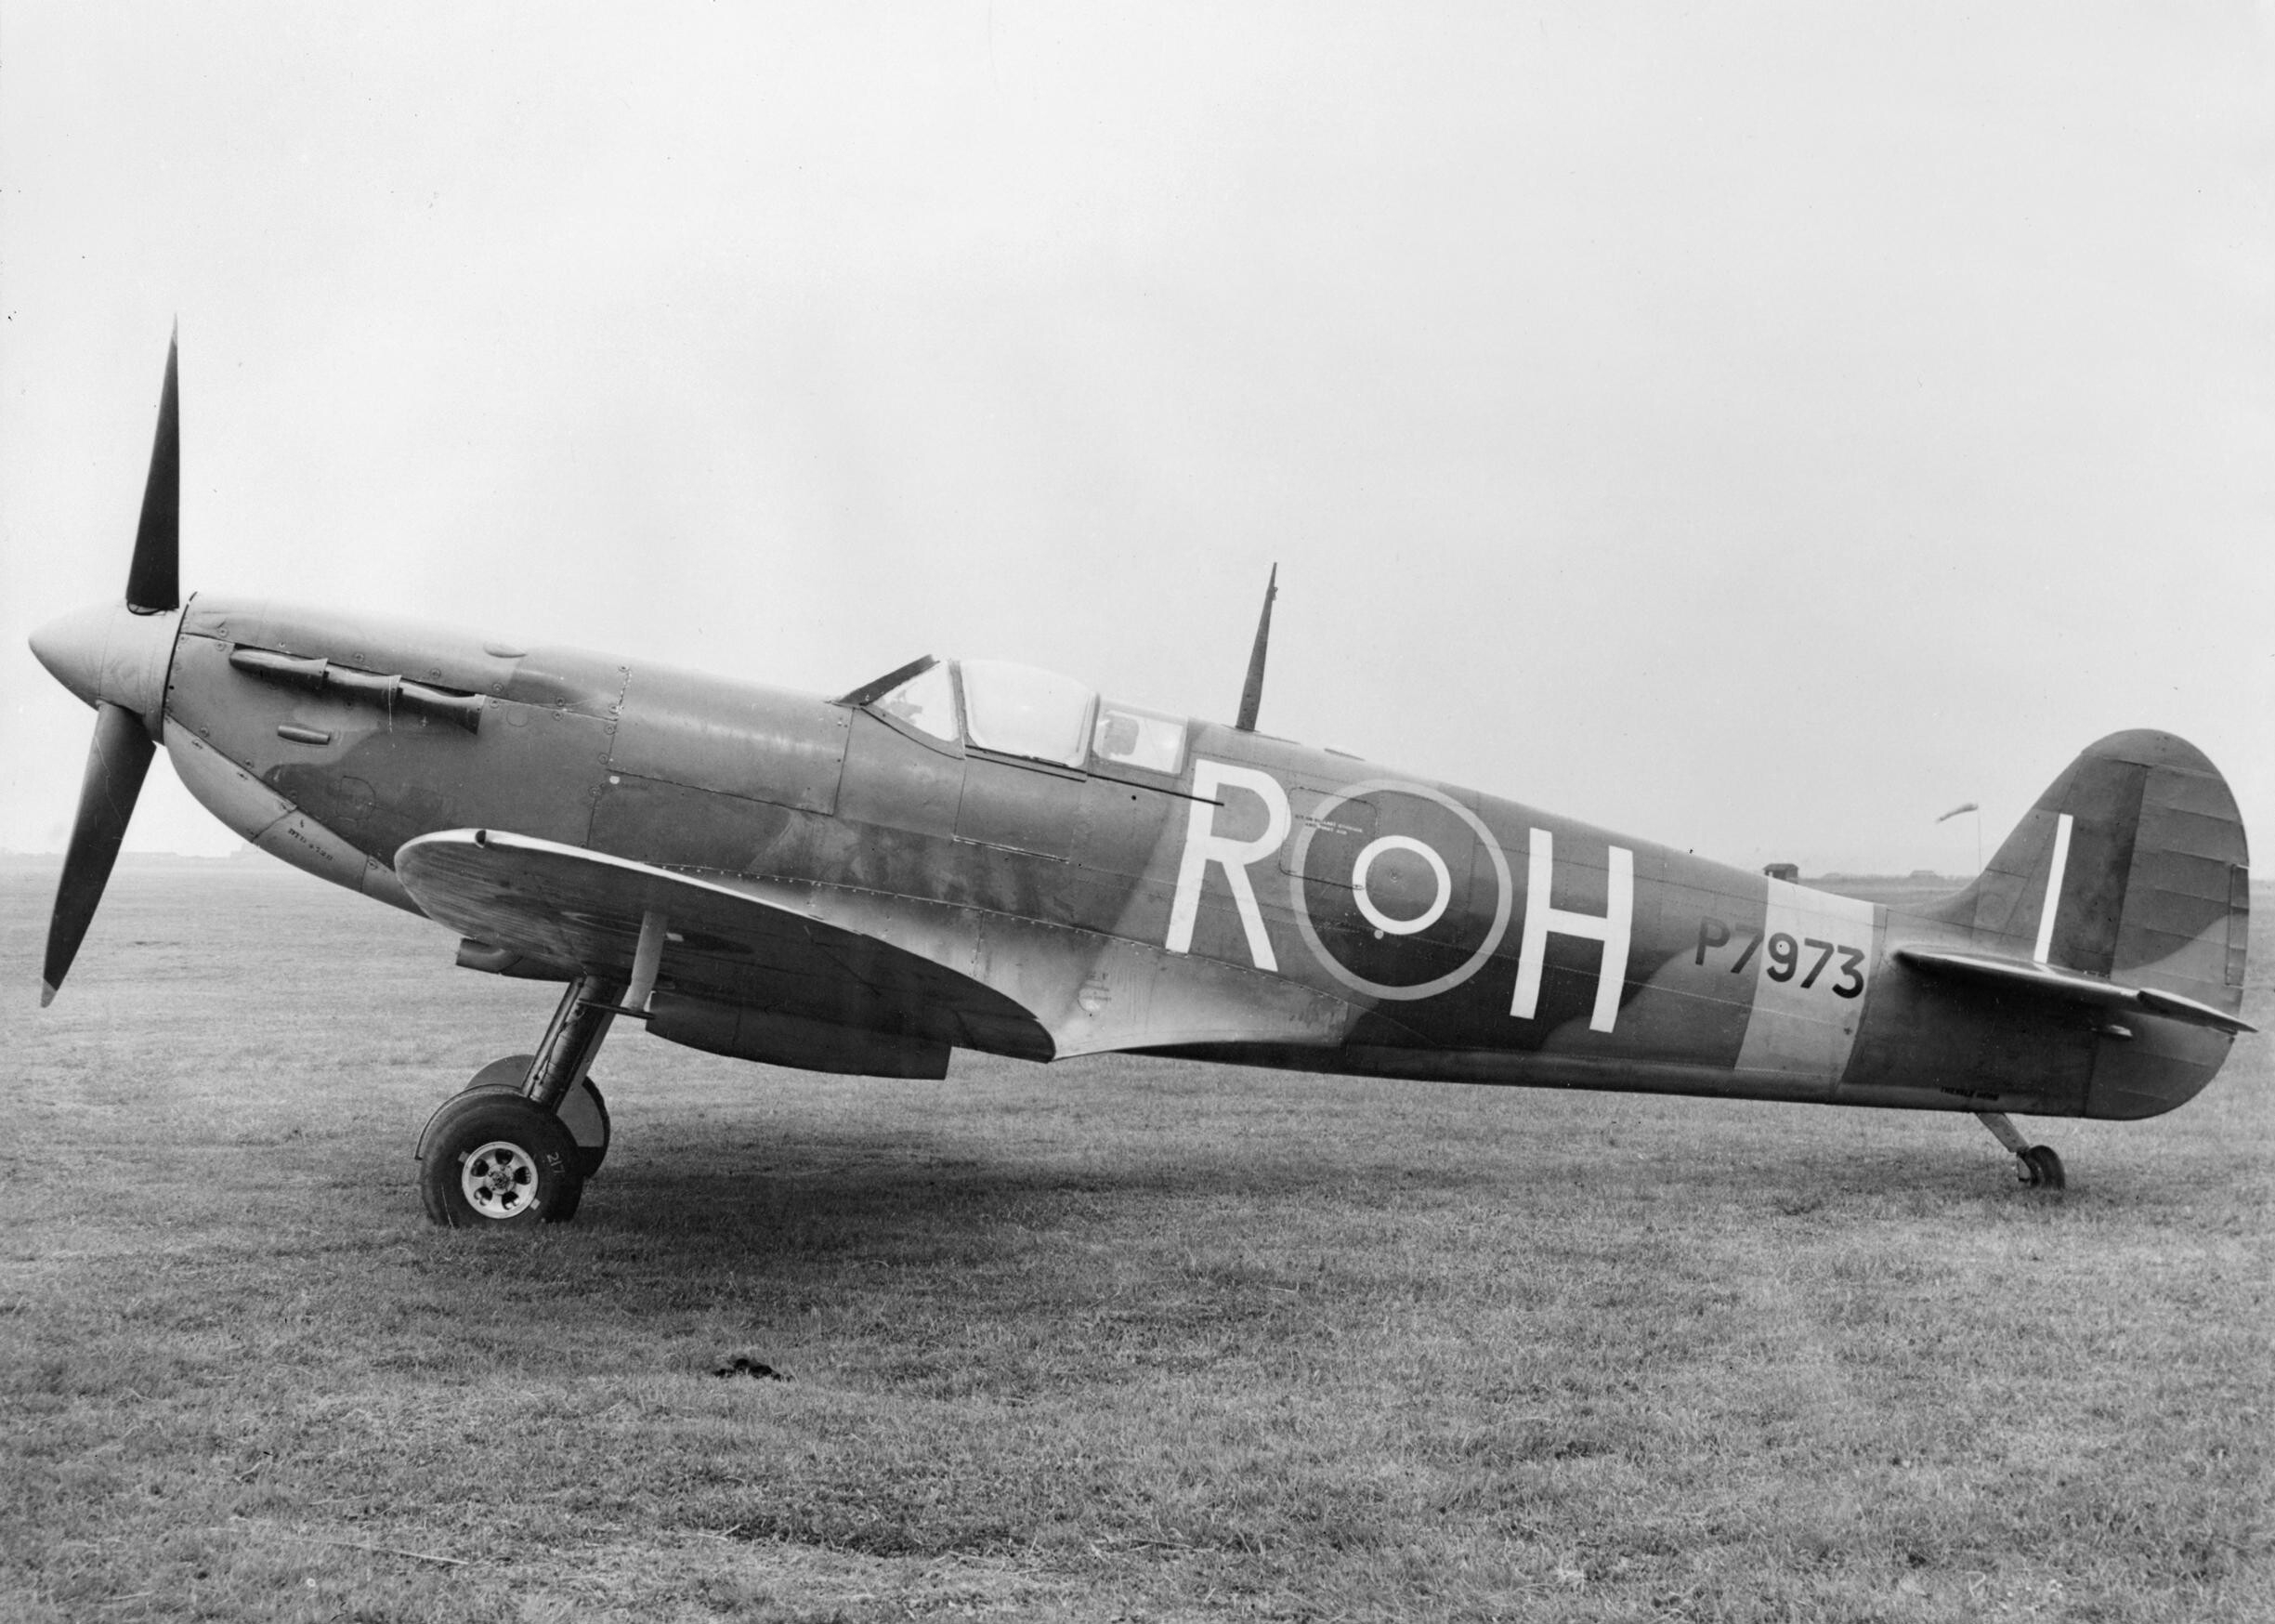 https://upload.wikimedia.org/wikipedia/commons/2/21/Aircraft_of_the_Royal_Air_Force%2C_1939-1945-_Supermarine_Spitfire._CH13252.jpg